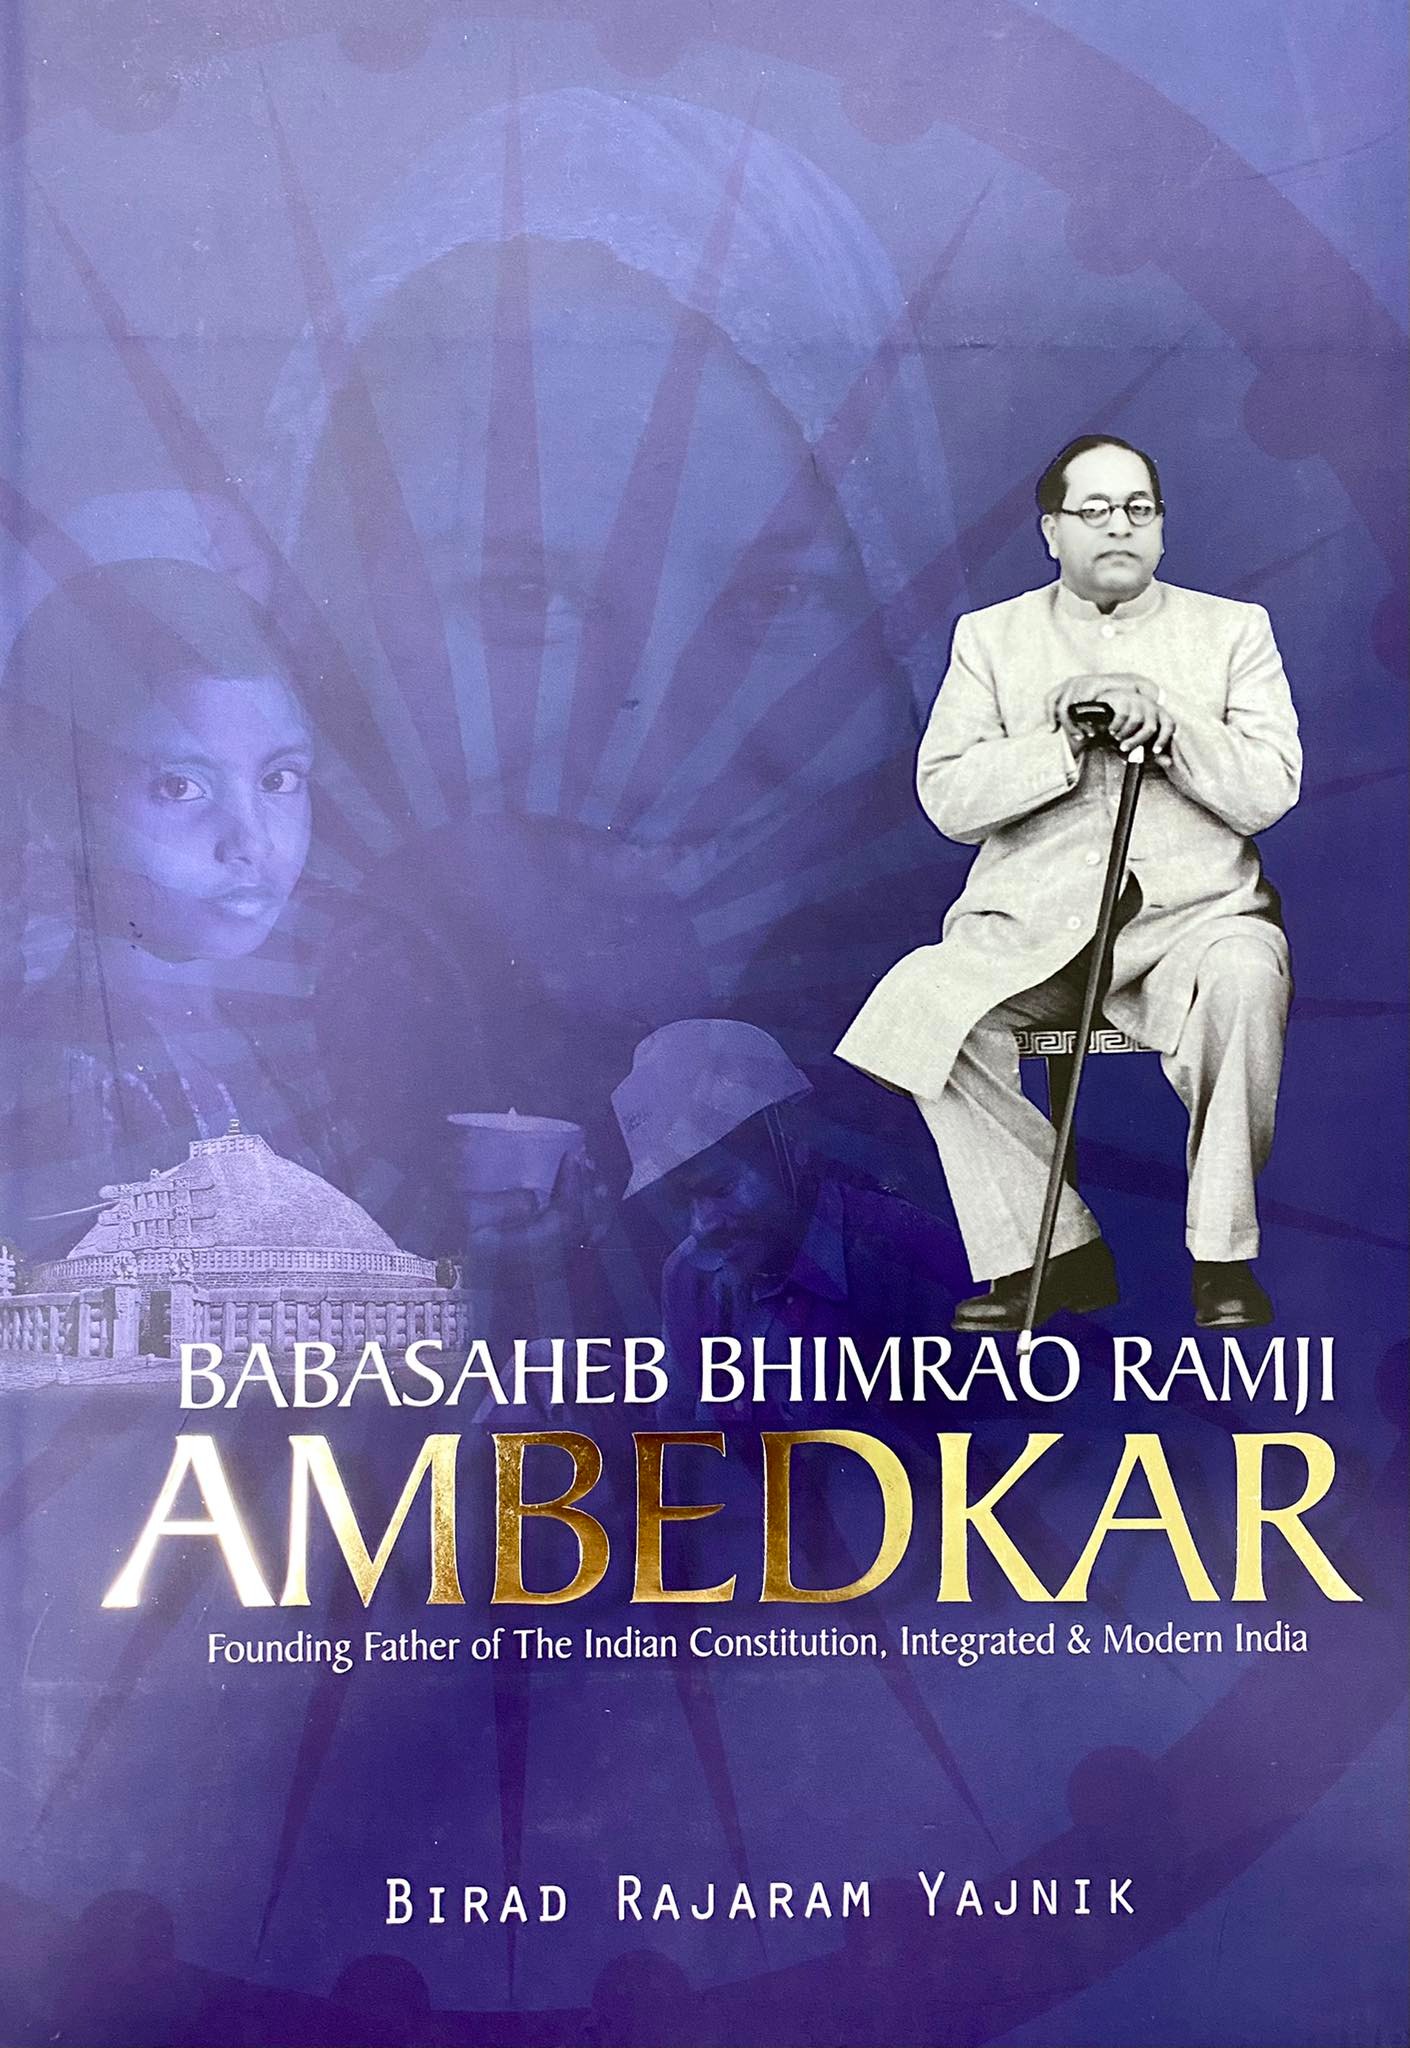 Babasaheb Bhimrao Ramji Ambedkar : founding father of the Indian constitution, integrated & modern India